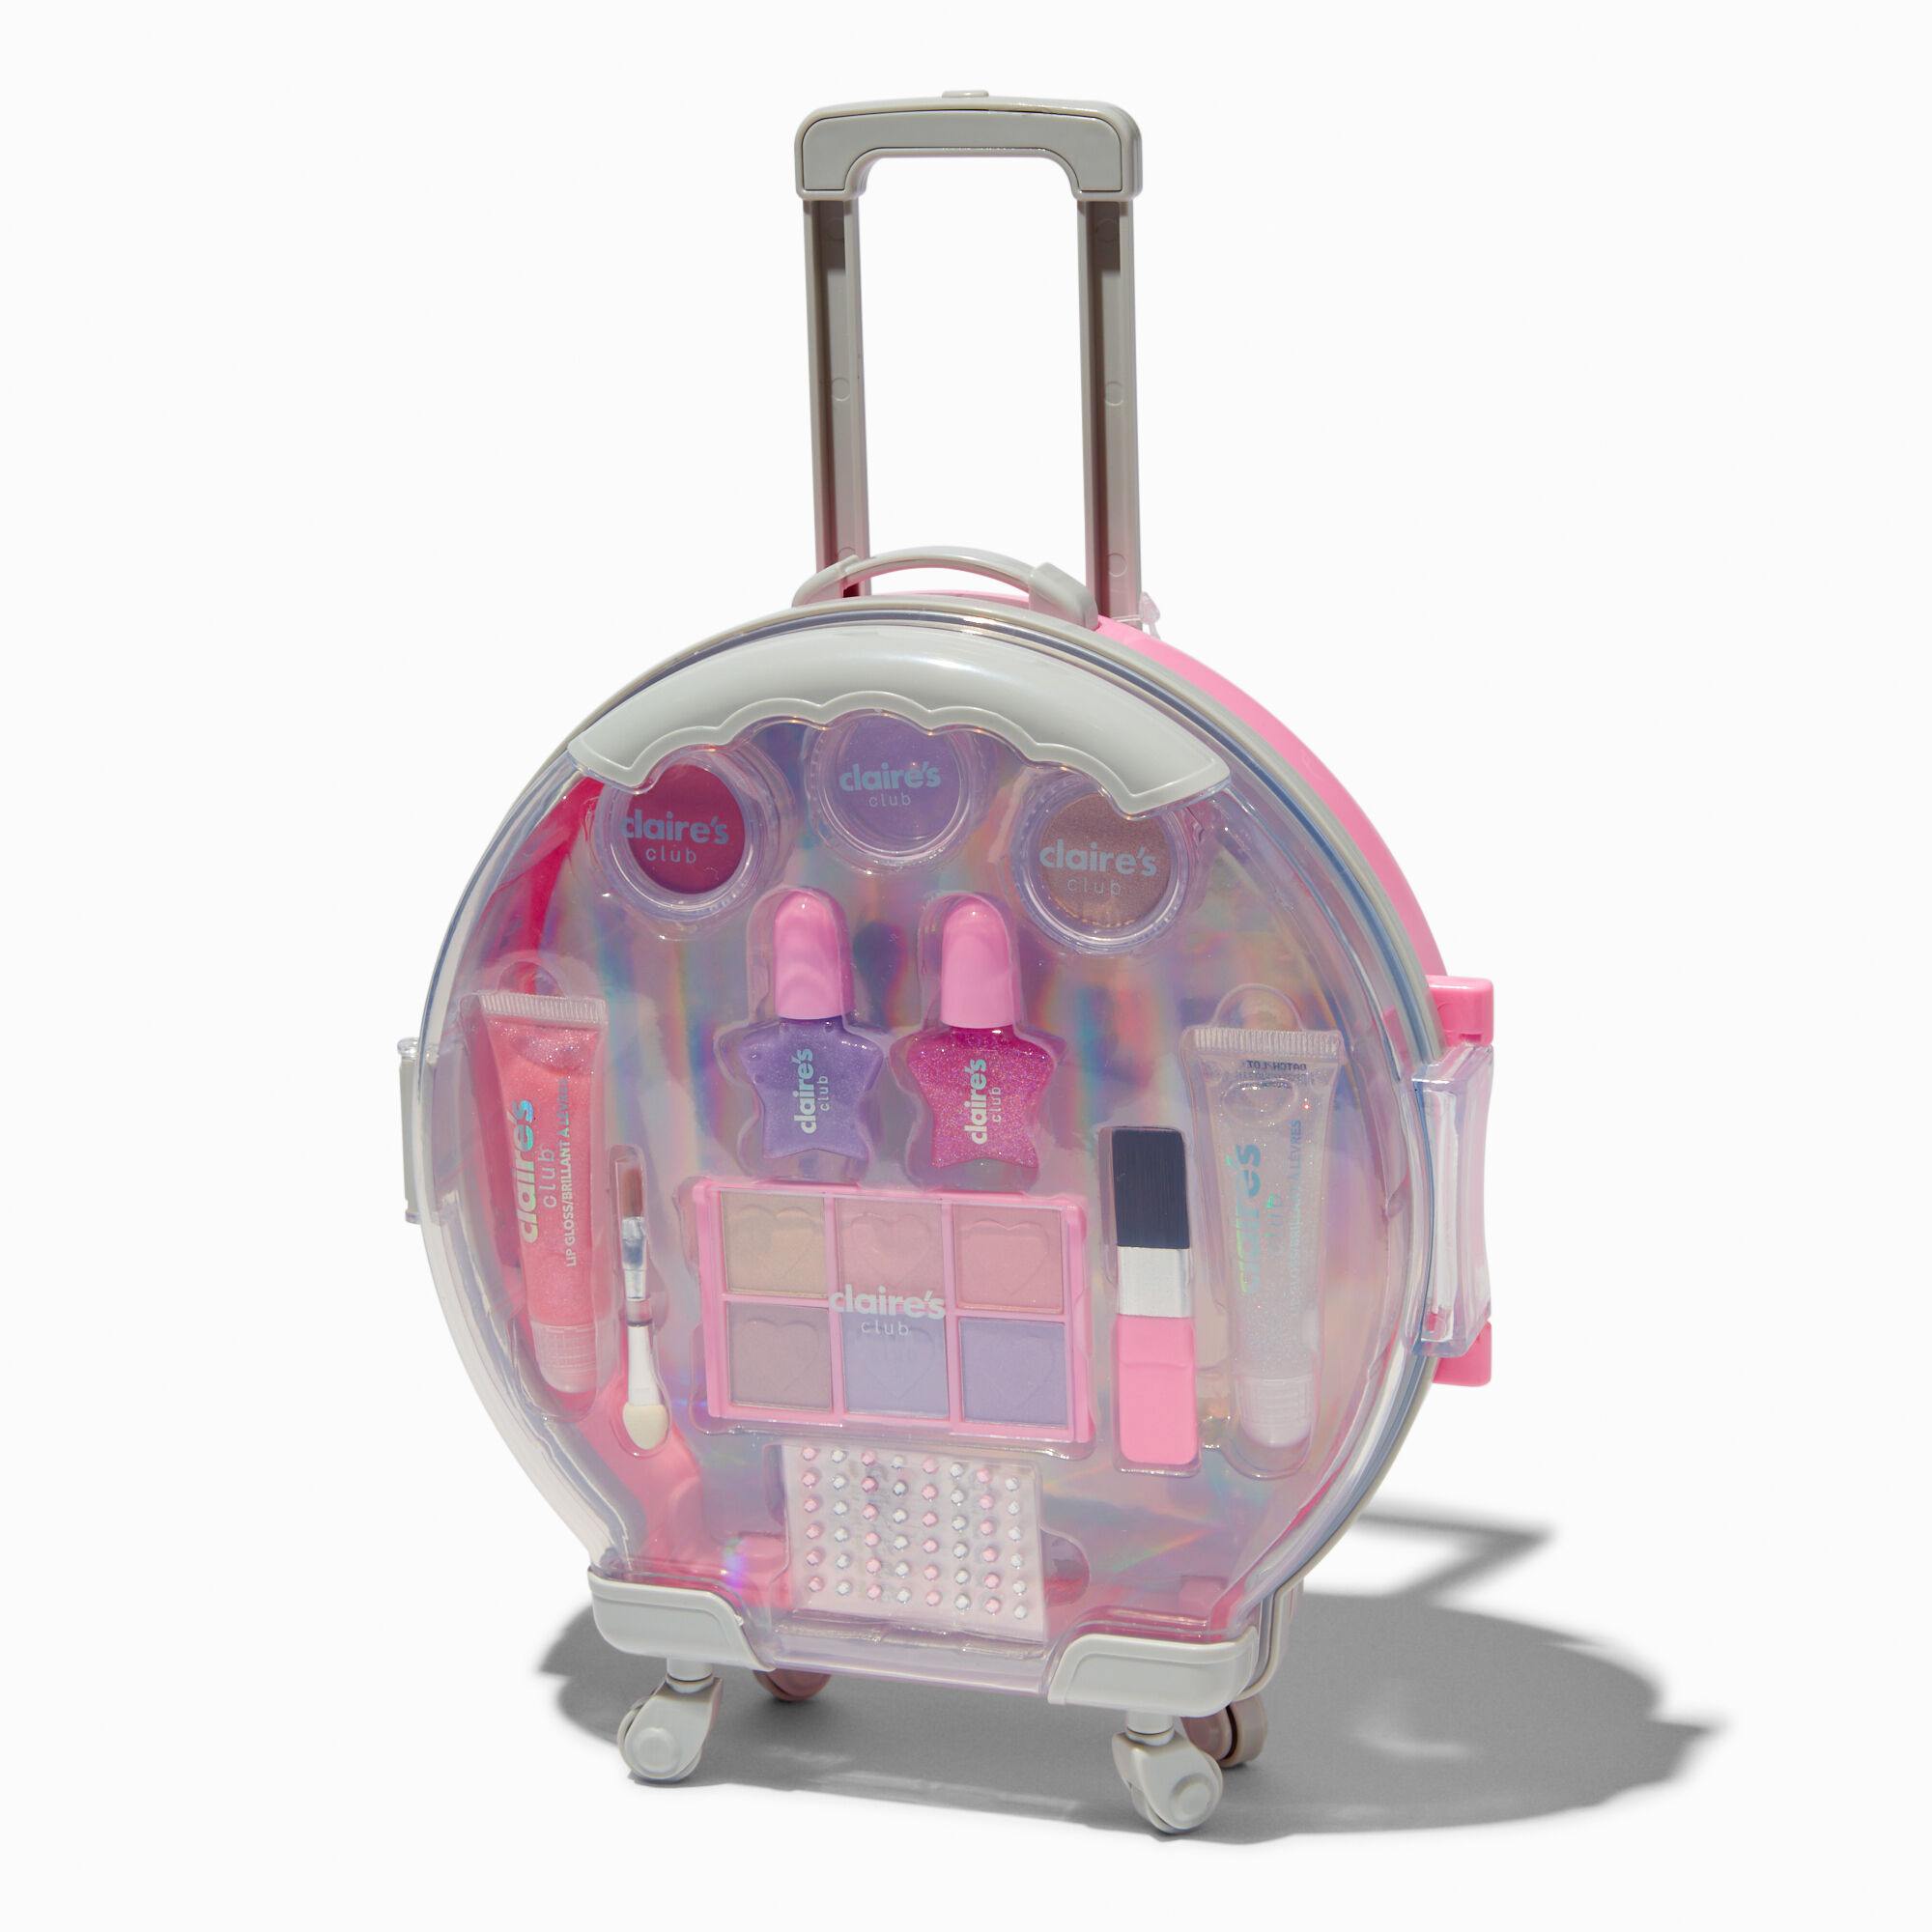 View Claires Club Large Luggage Makeup Set information